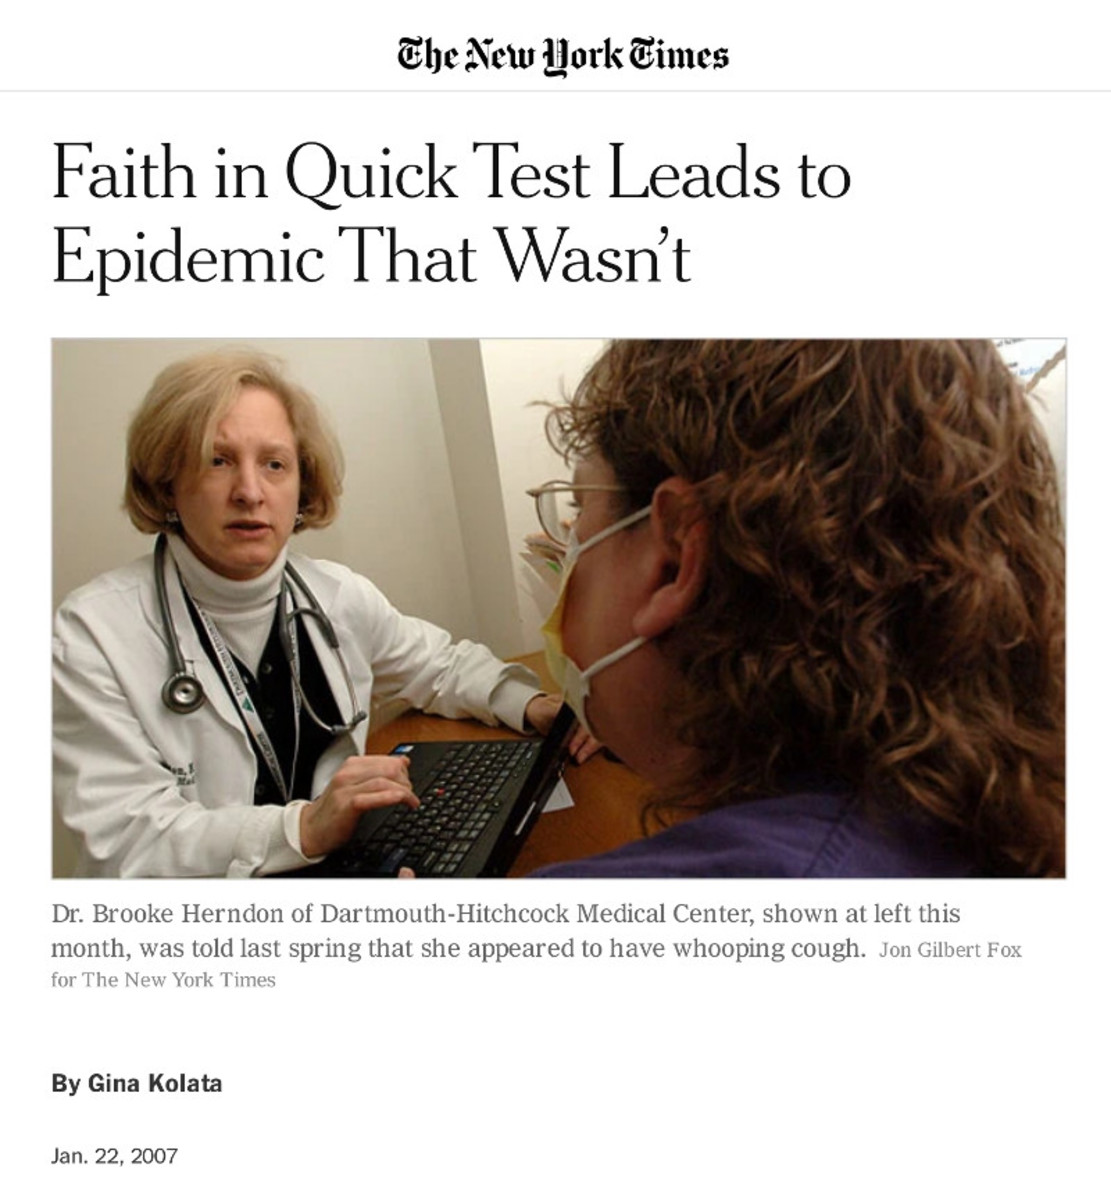 Headline image of New York Times 2007 article about false whooping cough epidemic, captured by R. G. Kernodle from the archived article online